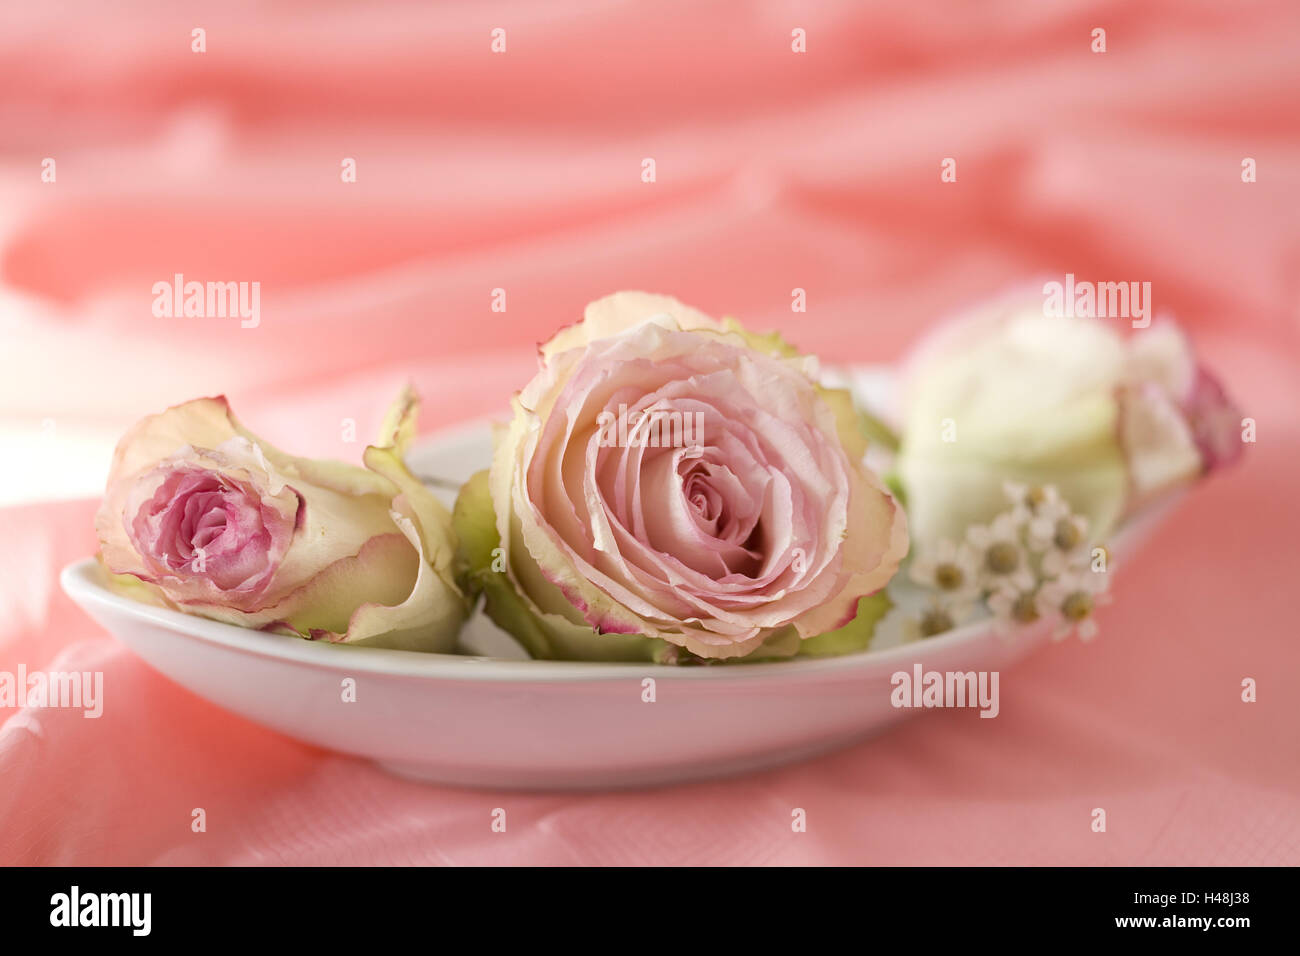 Pink roses in white porcelain peel on salmon-coloured ceiling, Stock Photo